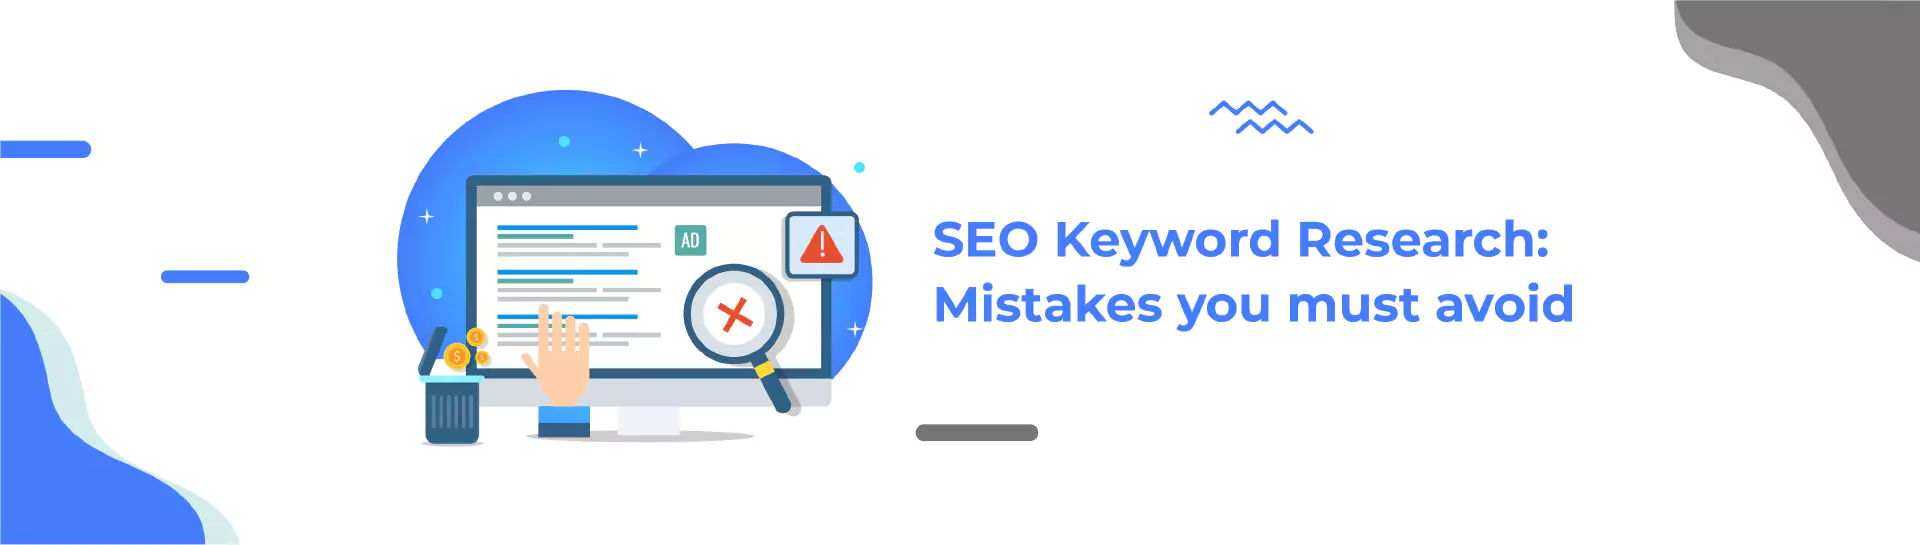 SEO Keyword Research: 14 Most Common Mistakes You Must Avoid